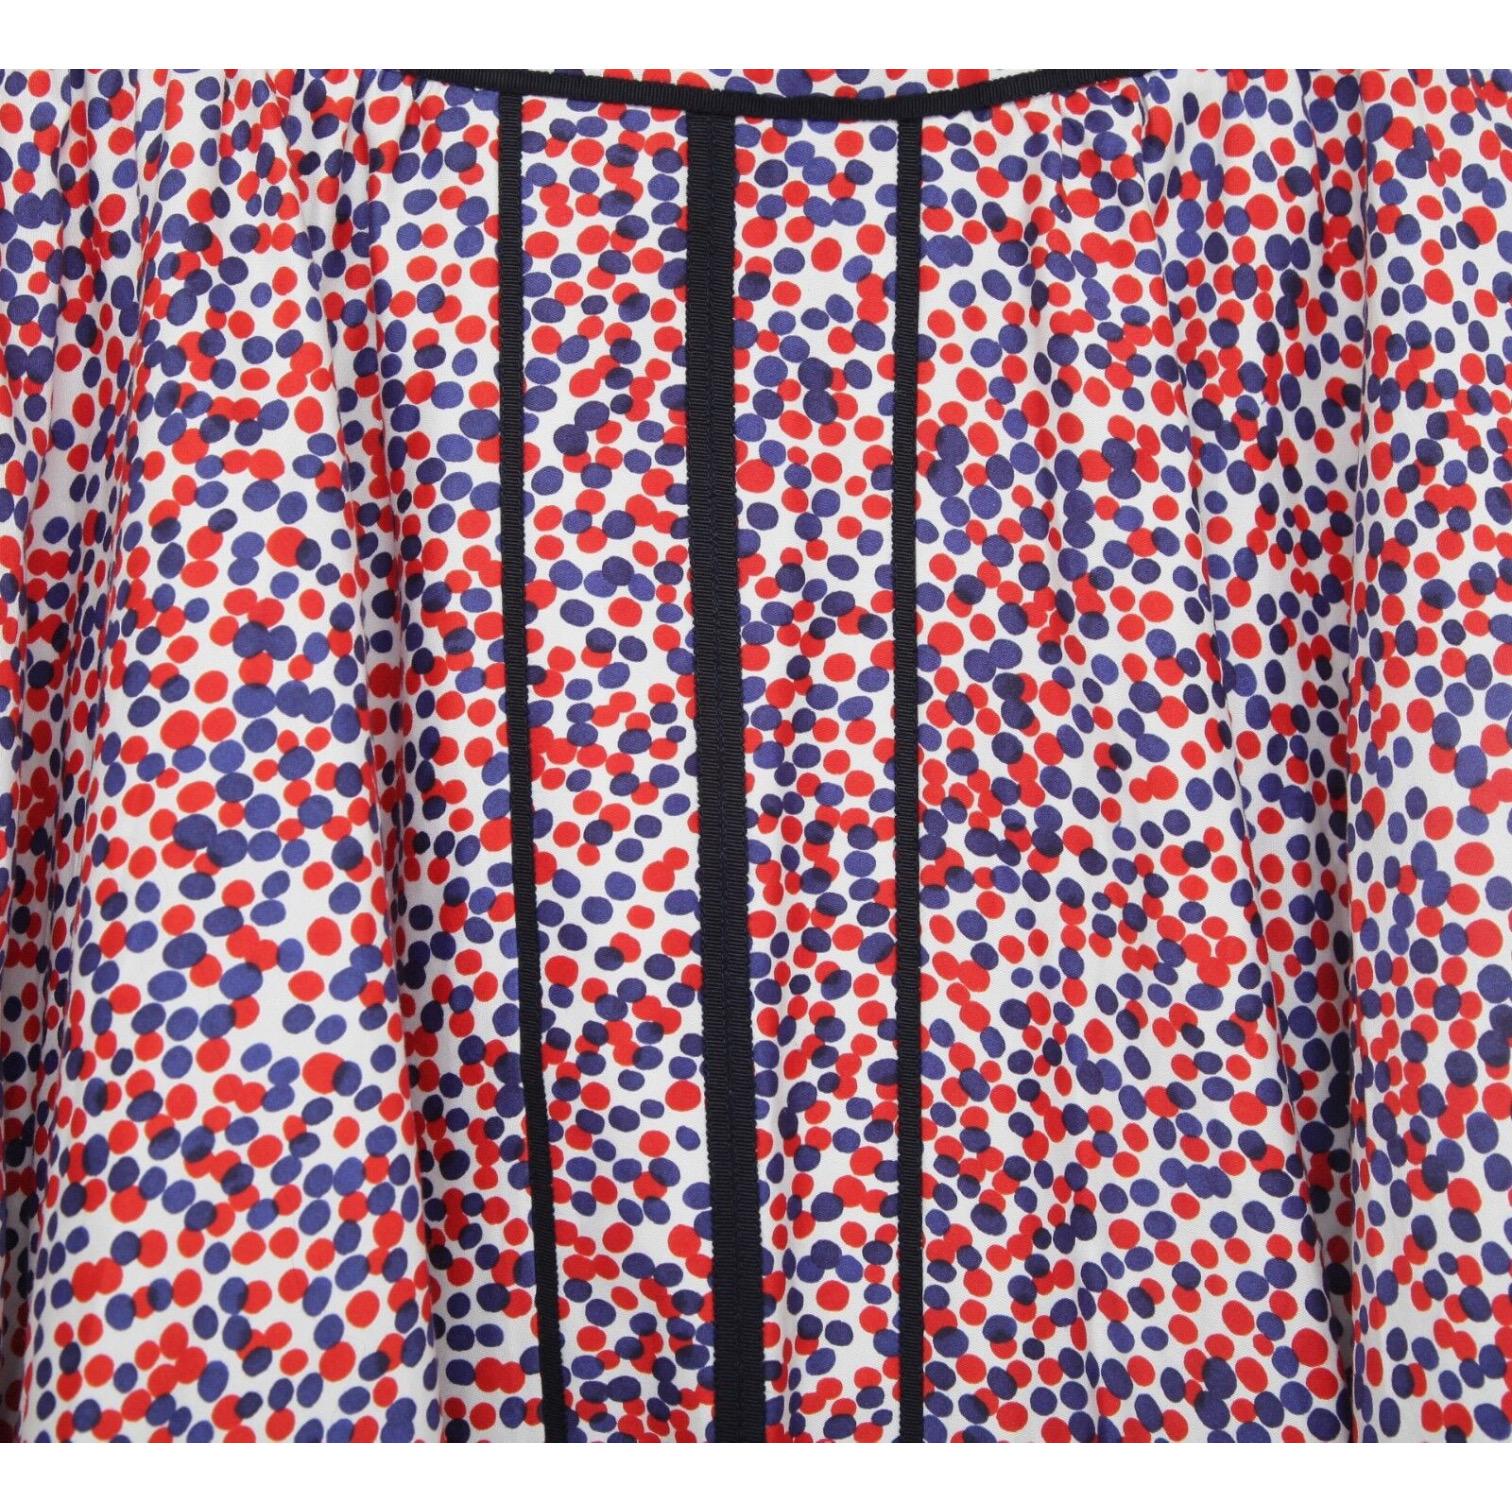 GUARANTEED AUTHENTIC CAROLINA HERRERA NEW YORK UMBRELLA SKIRT

Details:
- Umbrella style cotton blend skirt in a polka dot print.
- Colors are red, blue and white.
- Front split hem.
- Side covered zipper with double hook closure.
-